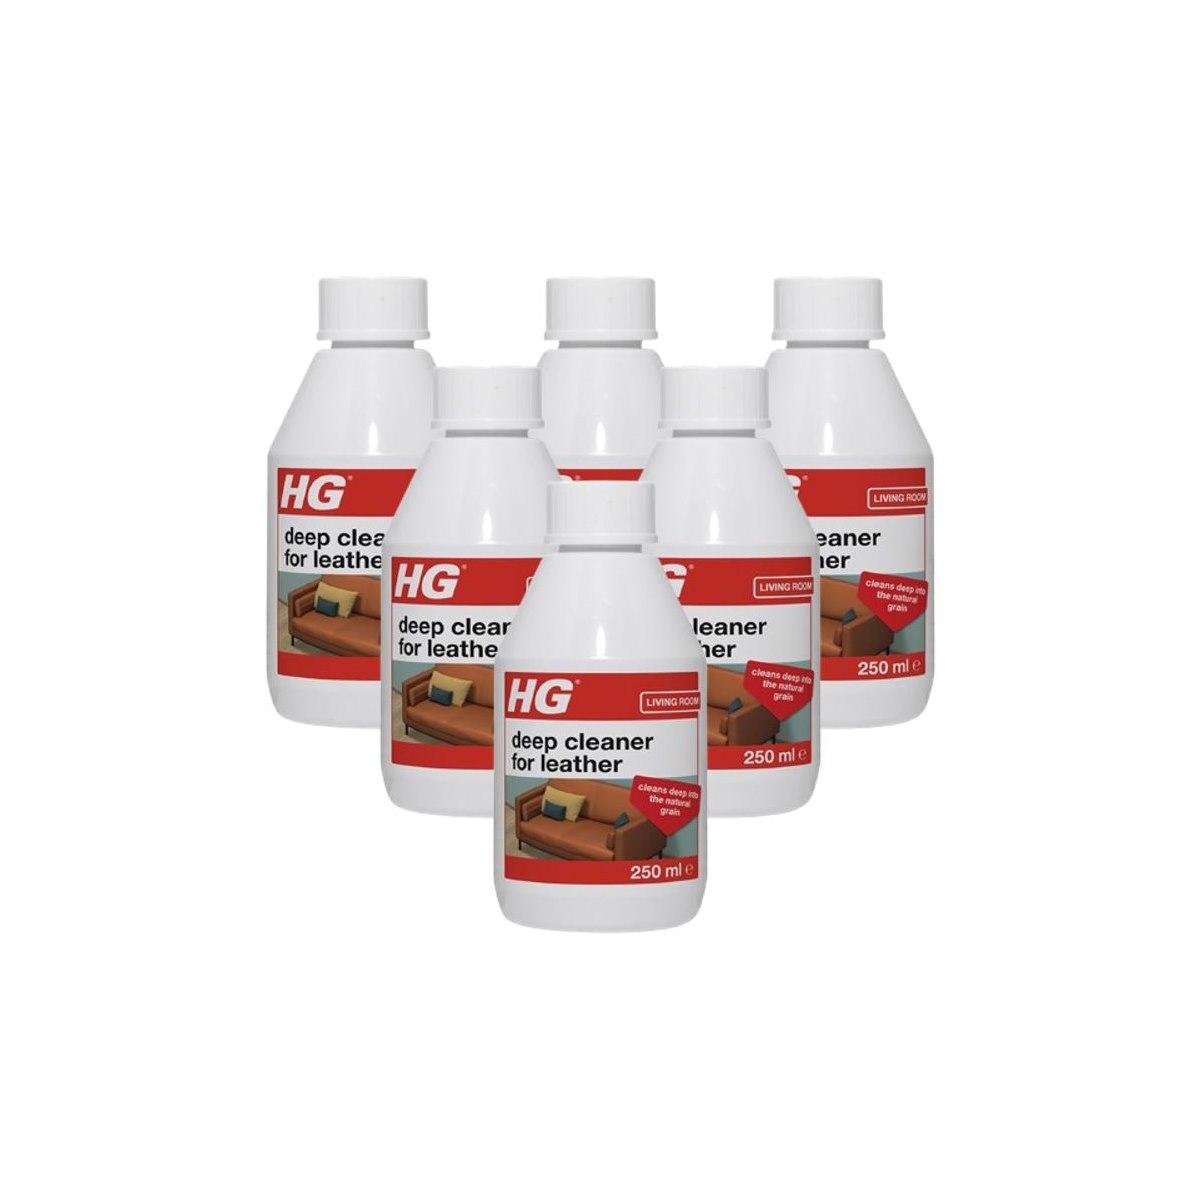 Case of 6 x HG Deep Cleaner for Leather 250ml